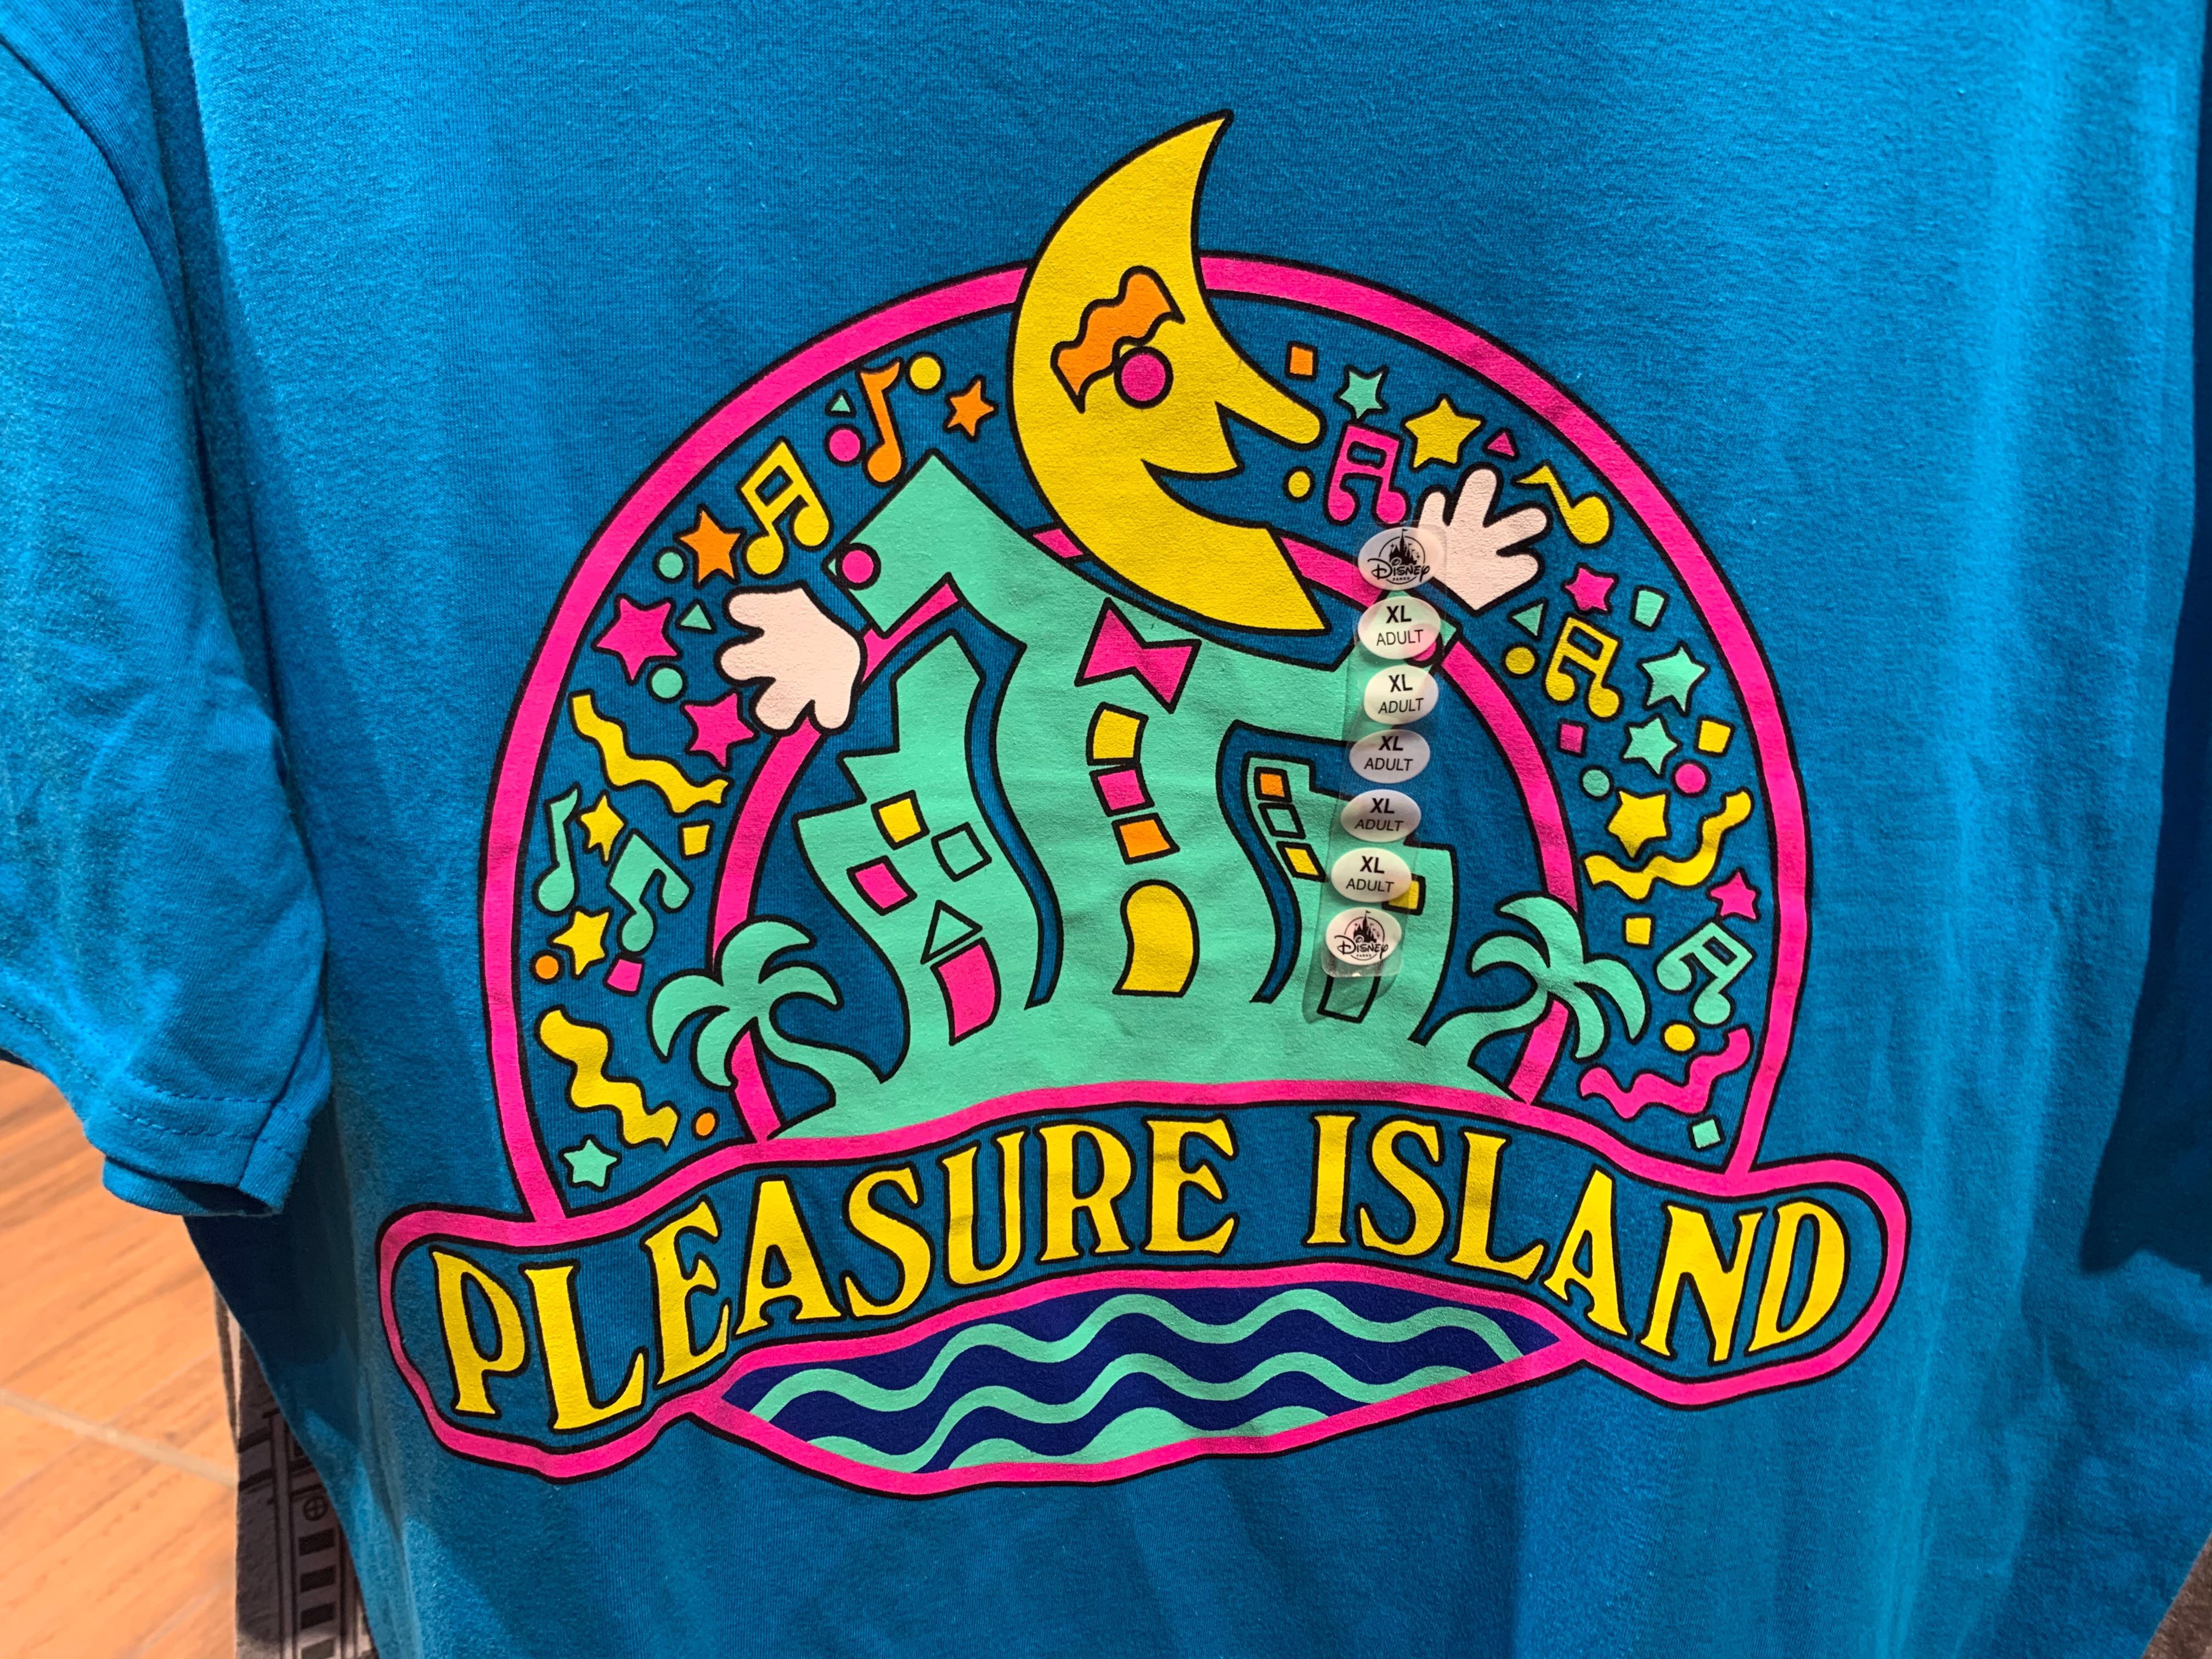 Photos Rad New Vintage Pleasure Island T Shirt Released At Disney Springs Wdw News Today